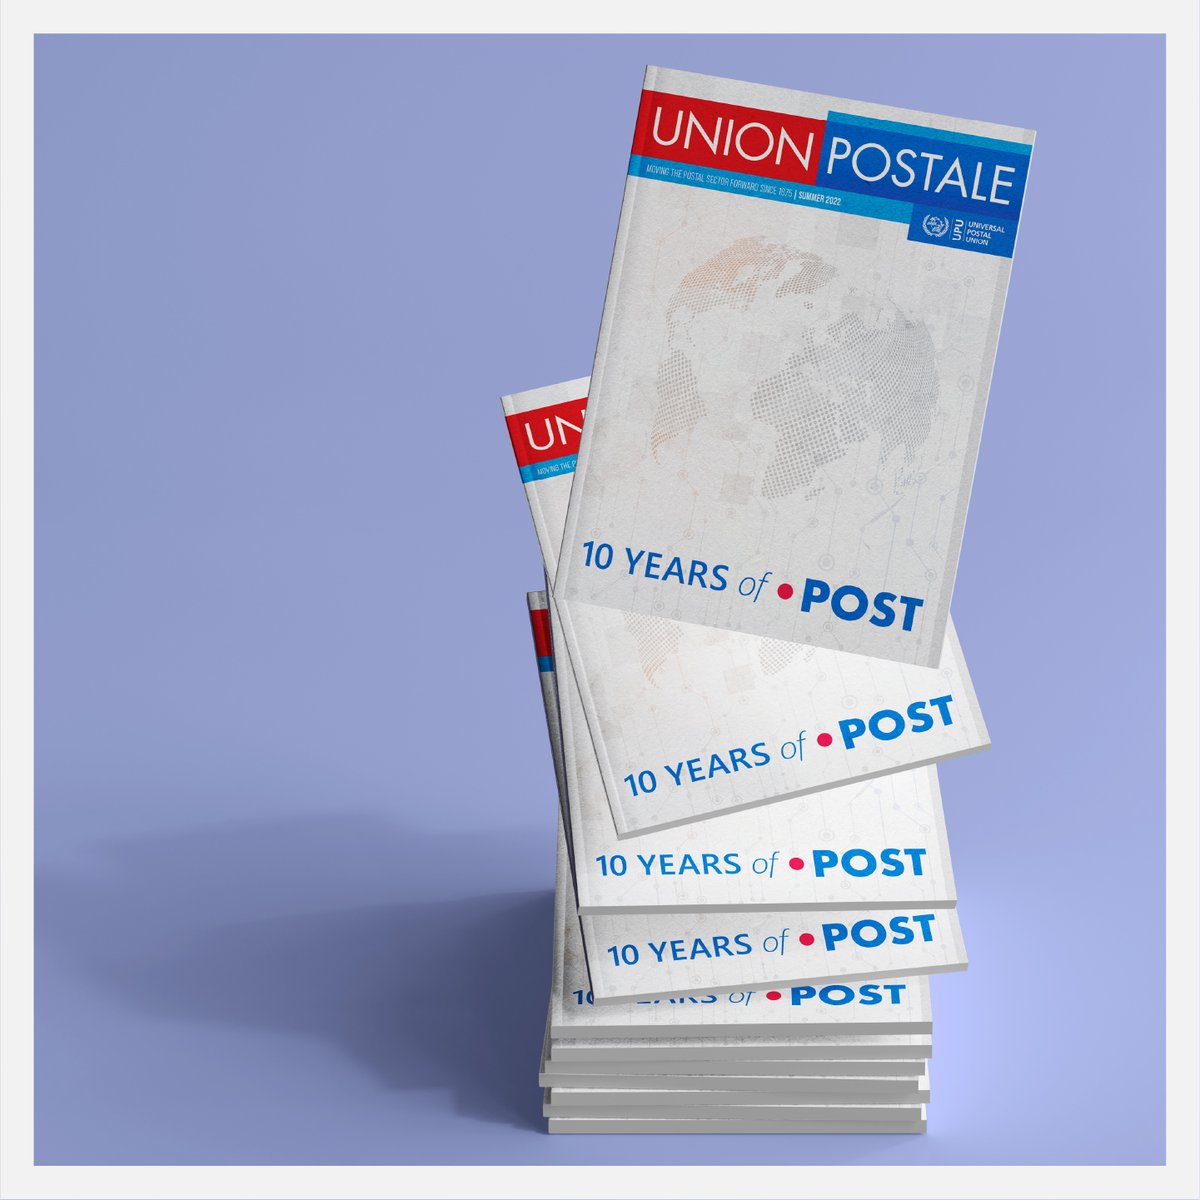 💡The new edition of #UnionPostale puts a spotlight on #digitalization💻

Read how Posts advance #InformationSociety & bridge the #DigitalDivide & how UPU, through its .POST, helps them do so in a secure & trusted manner🔐

Accessible online right now!👇

bit.ly/3HM1wCk